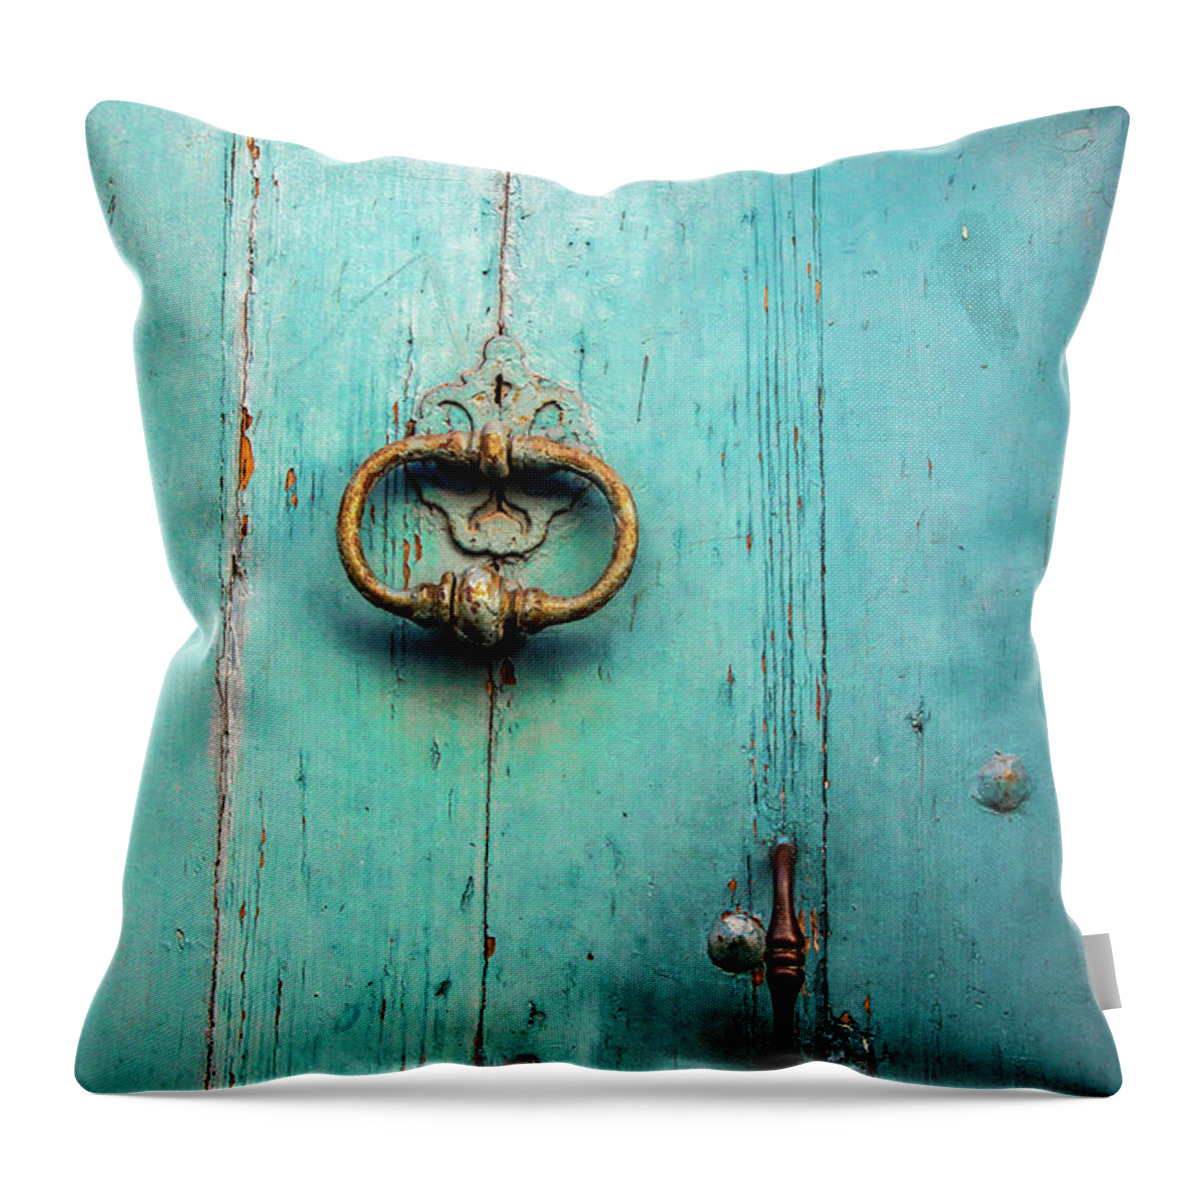 Tranquility Throw Pillow featuring the photograph Porte Blue by Elly Schuurman